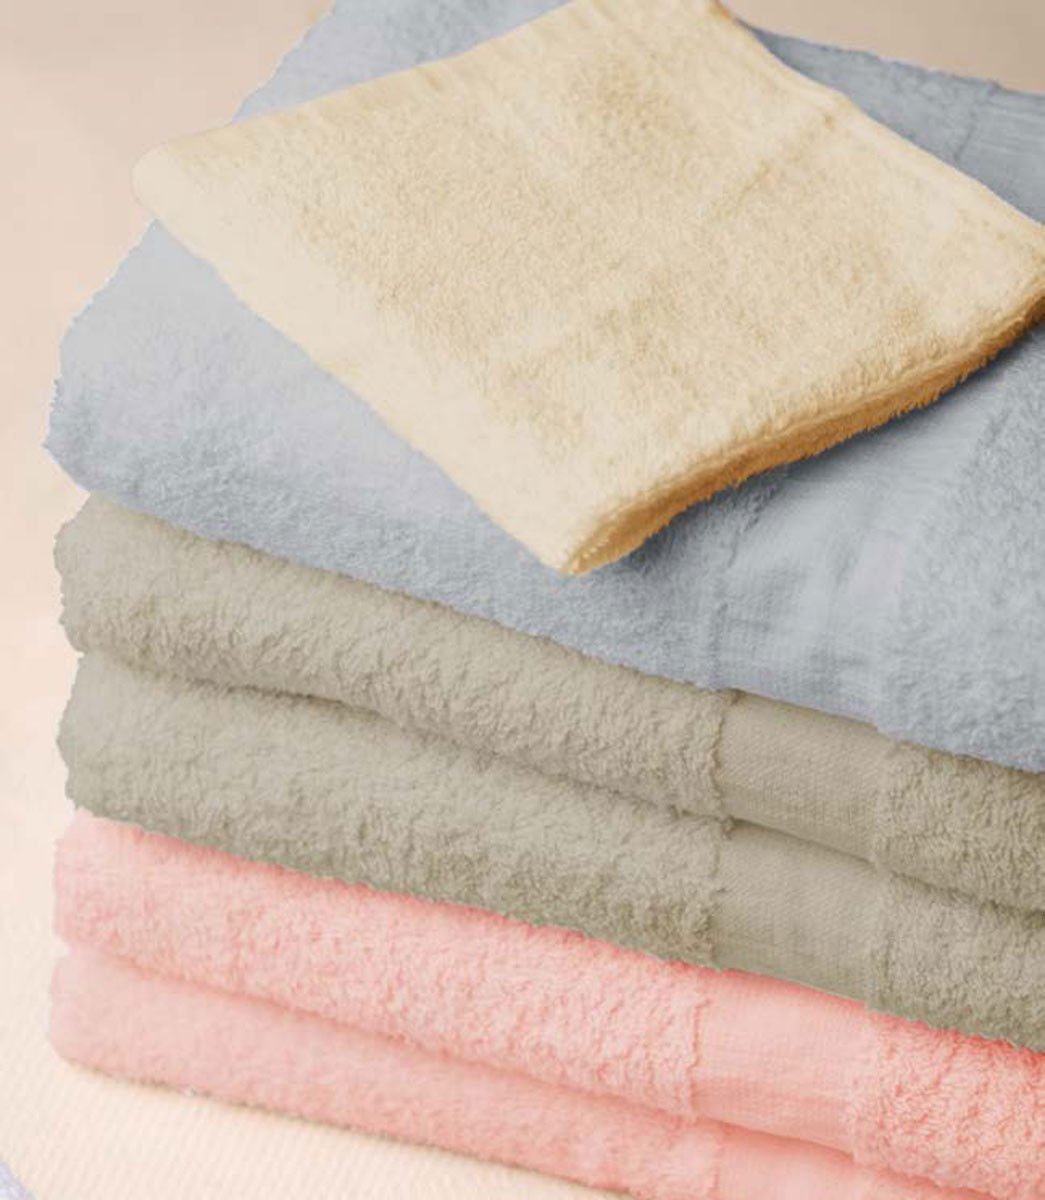 Are the 100 cotton towels, Blue Economy, fade resistant?